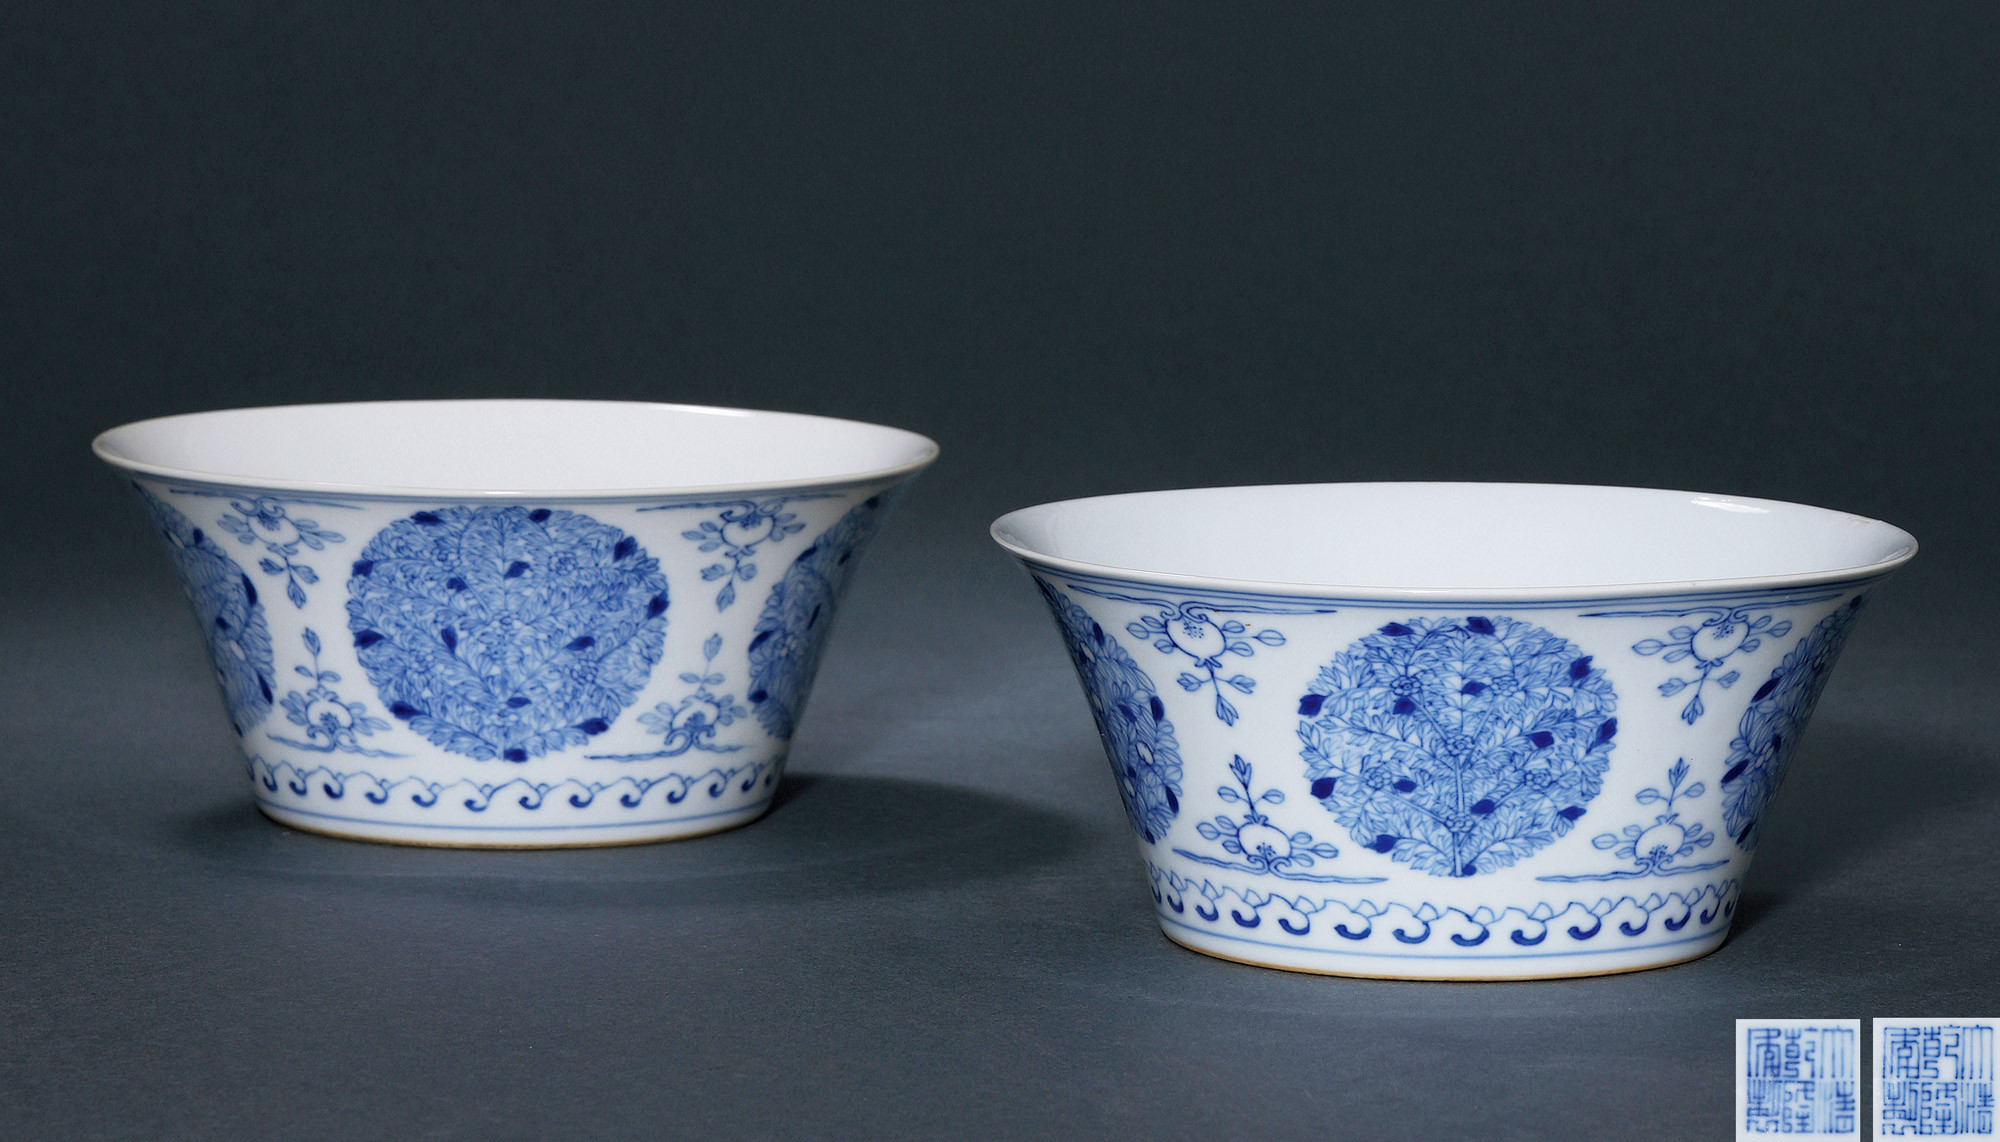 A PAIR OF BLUE AND WHITE BOWL WITH FLOWERS DESIGN